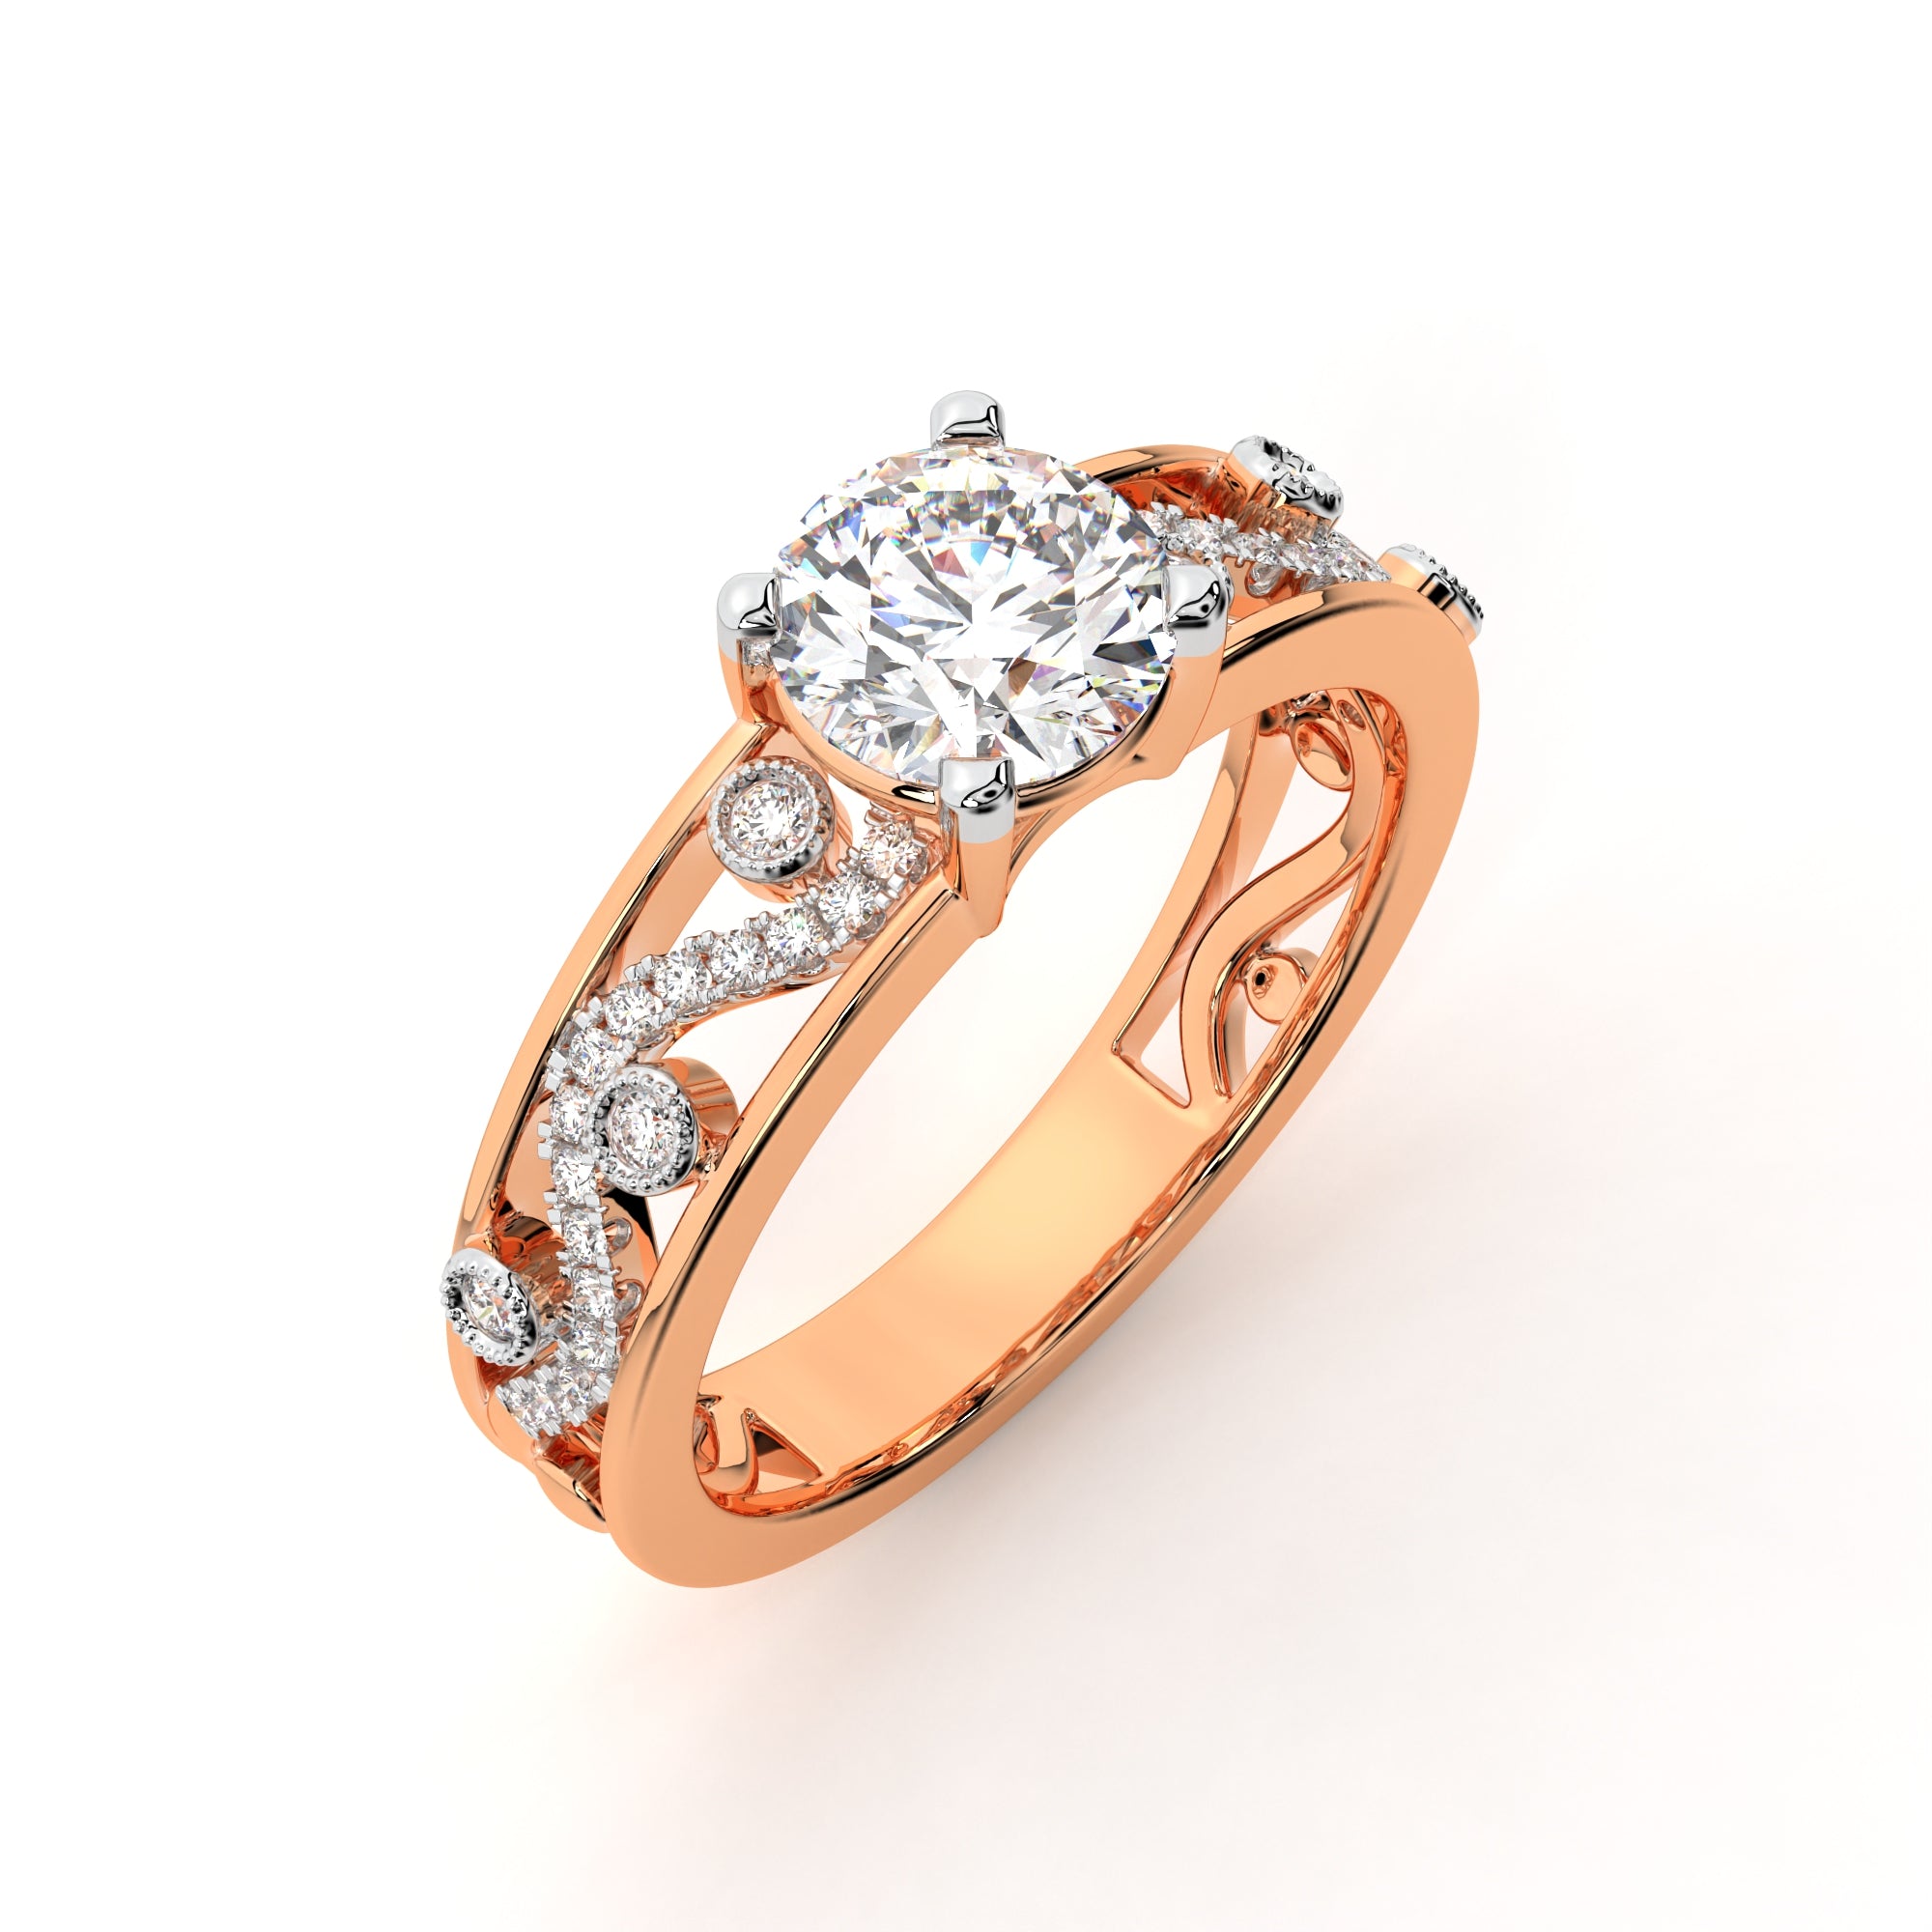 Entwined Hearts Diamond Ring